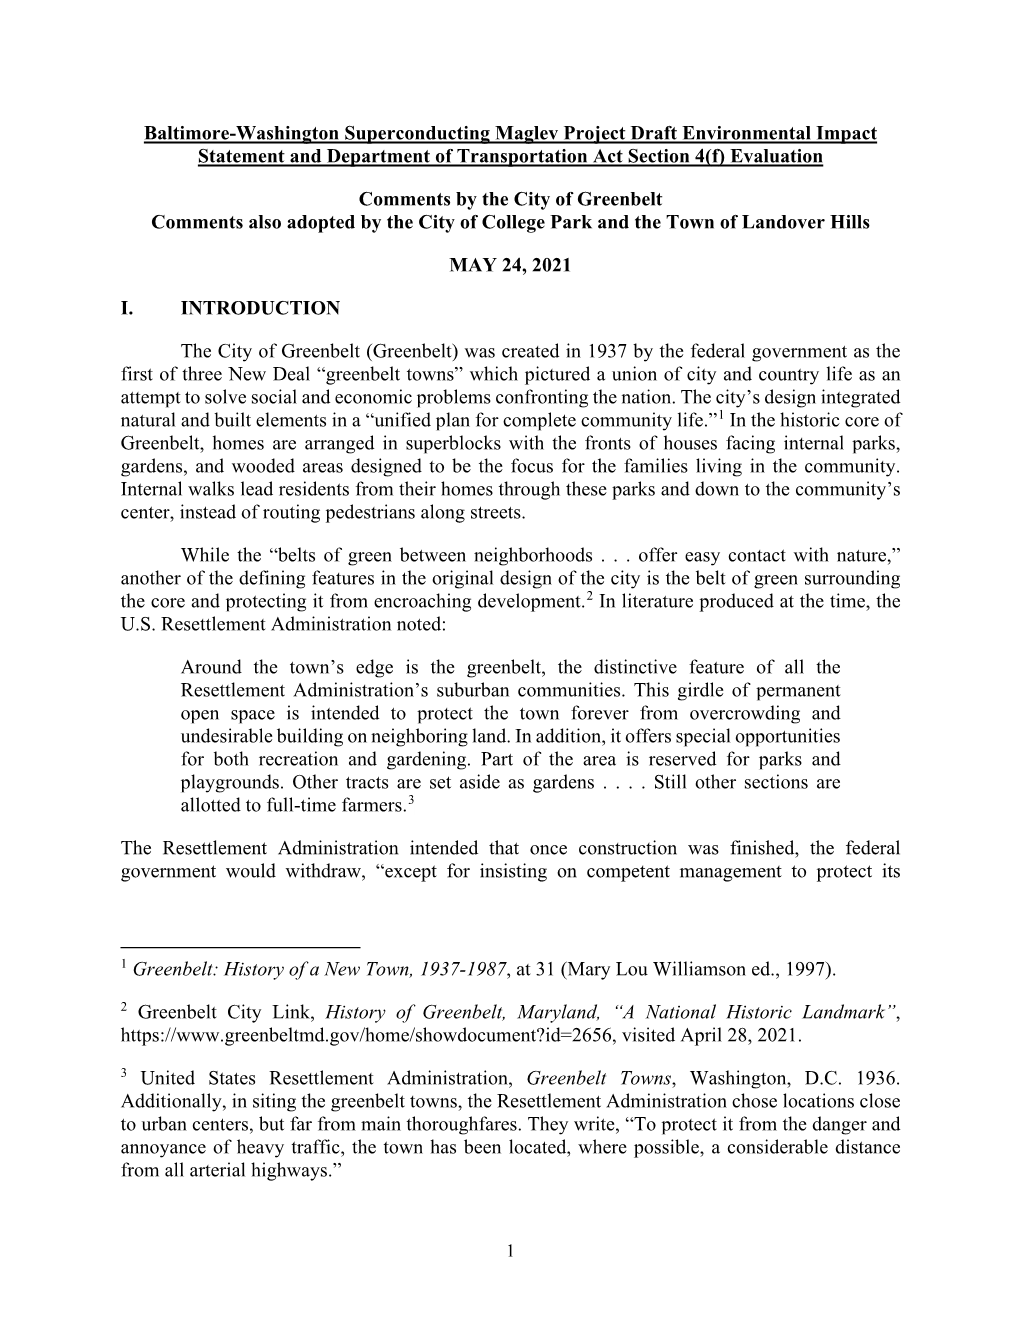 Baltimore-Washington Superconducting Maglev Project Draft Environmental Impact Statement and Department of Transportation Act Section 4(F) Evaluation